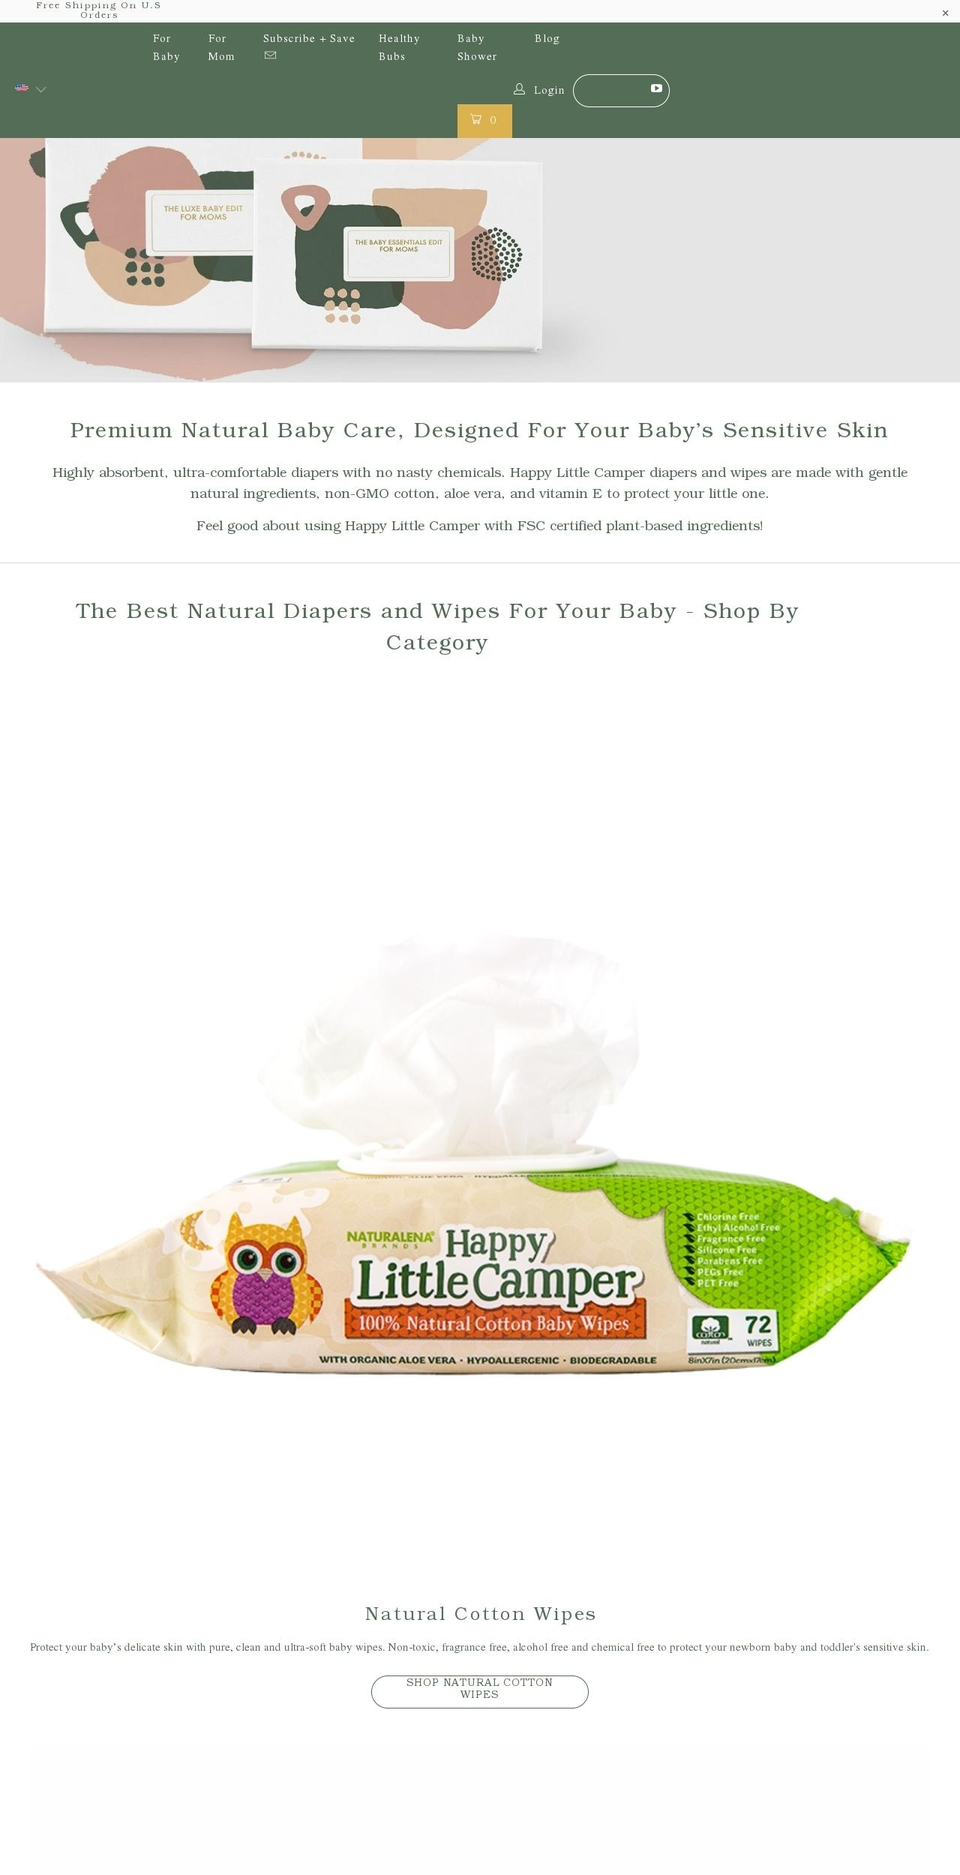 Votive Happy Little Camper Live 8.5 Shopify theme site example hlcbaby.com